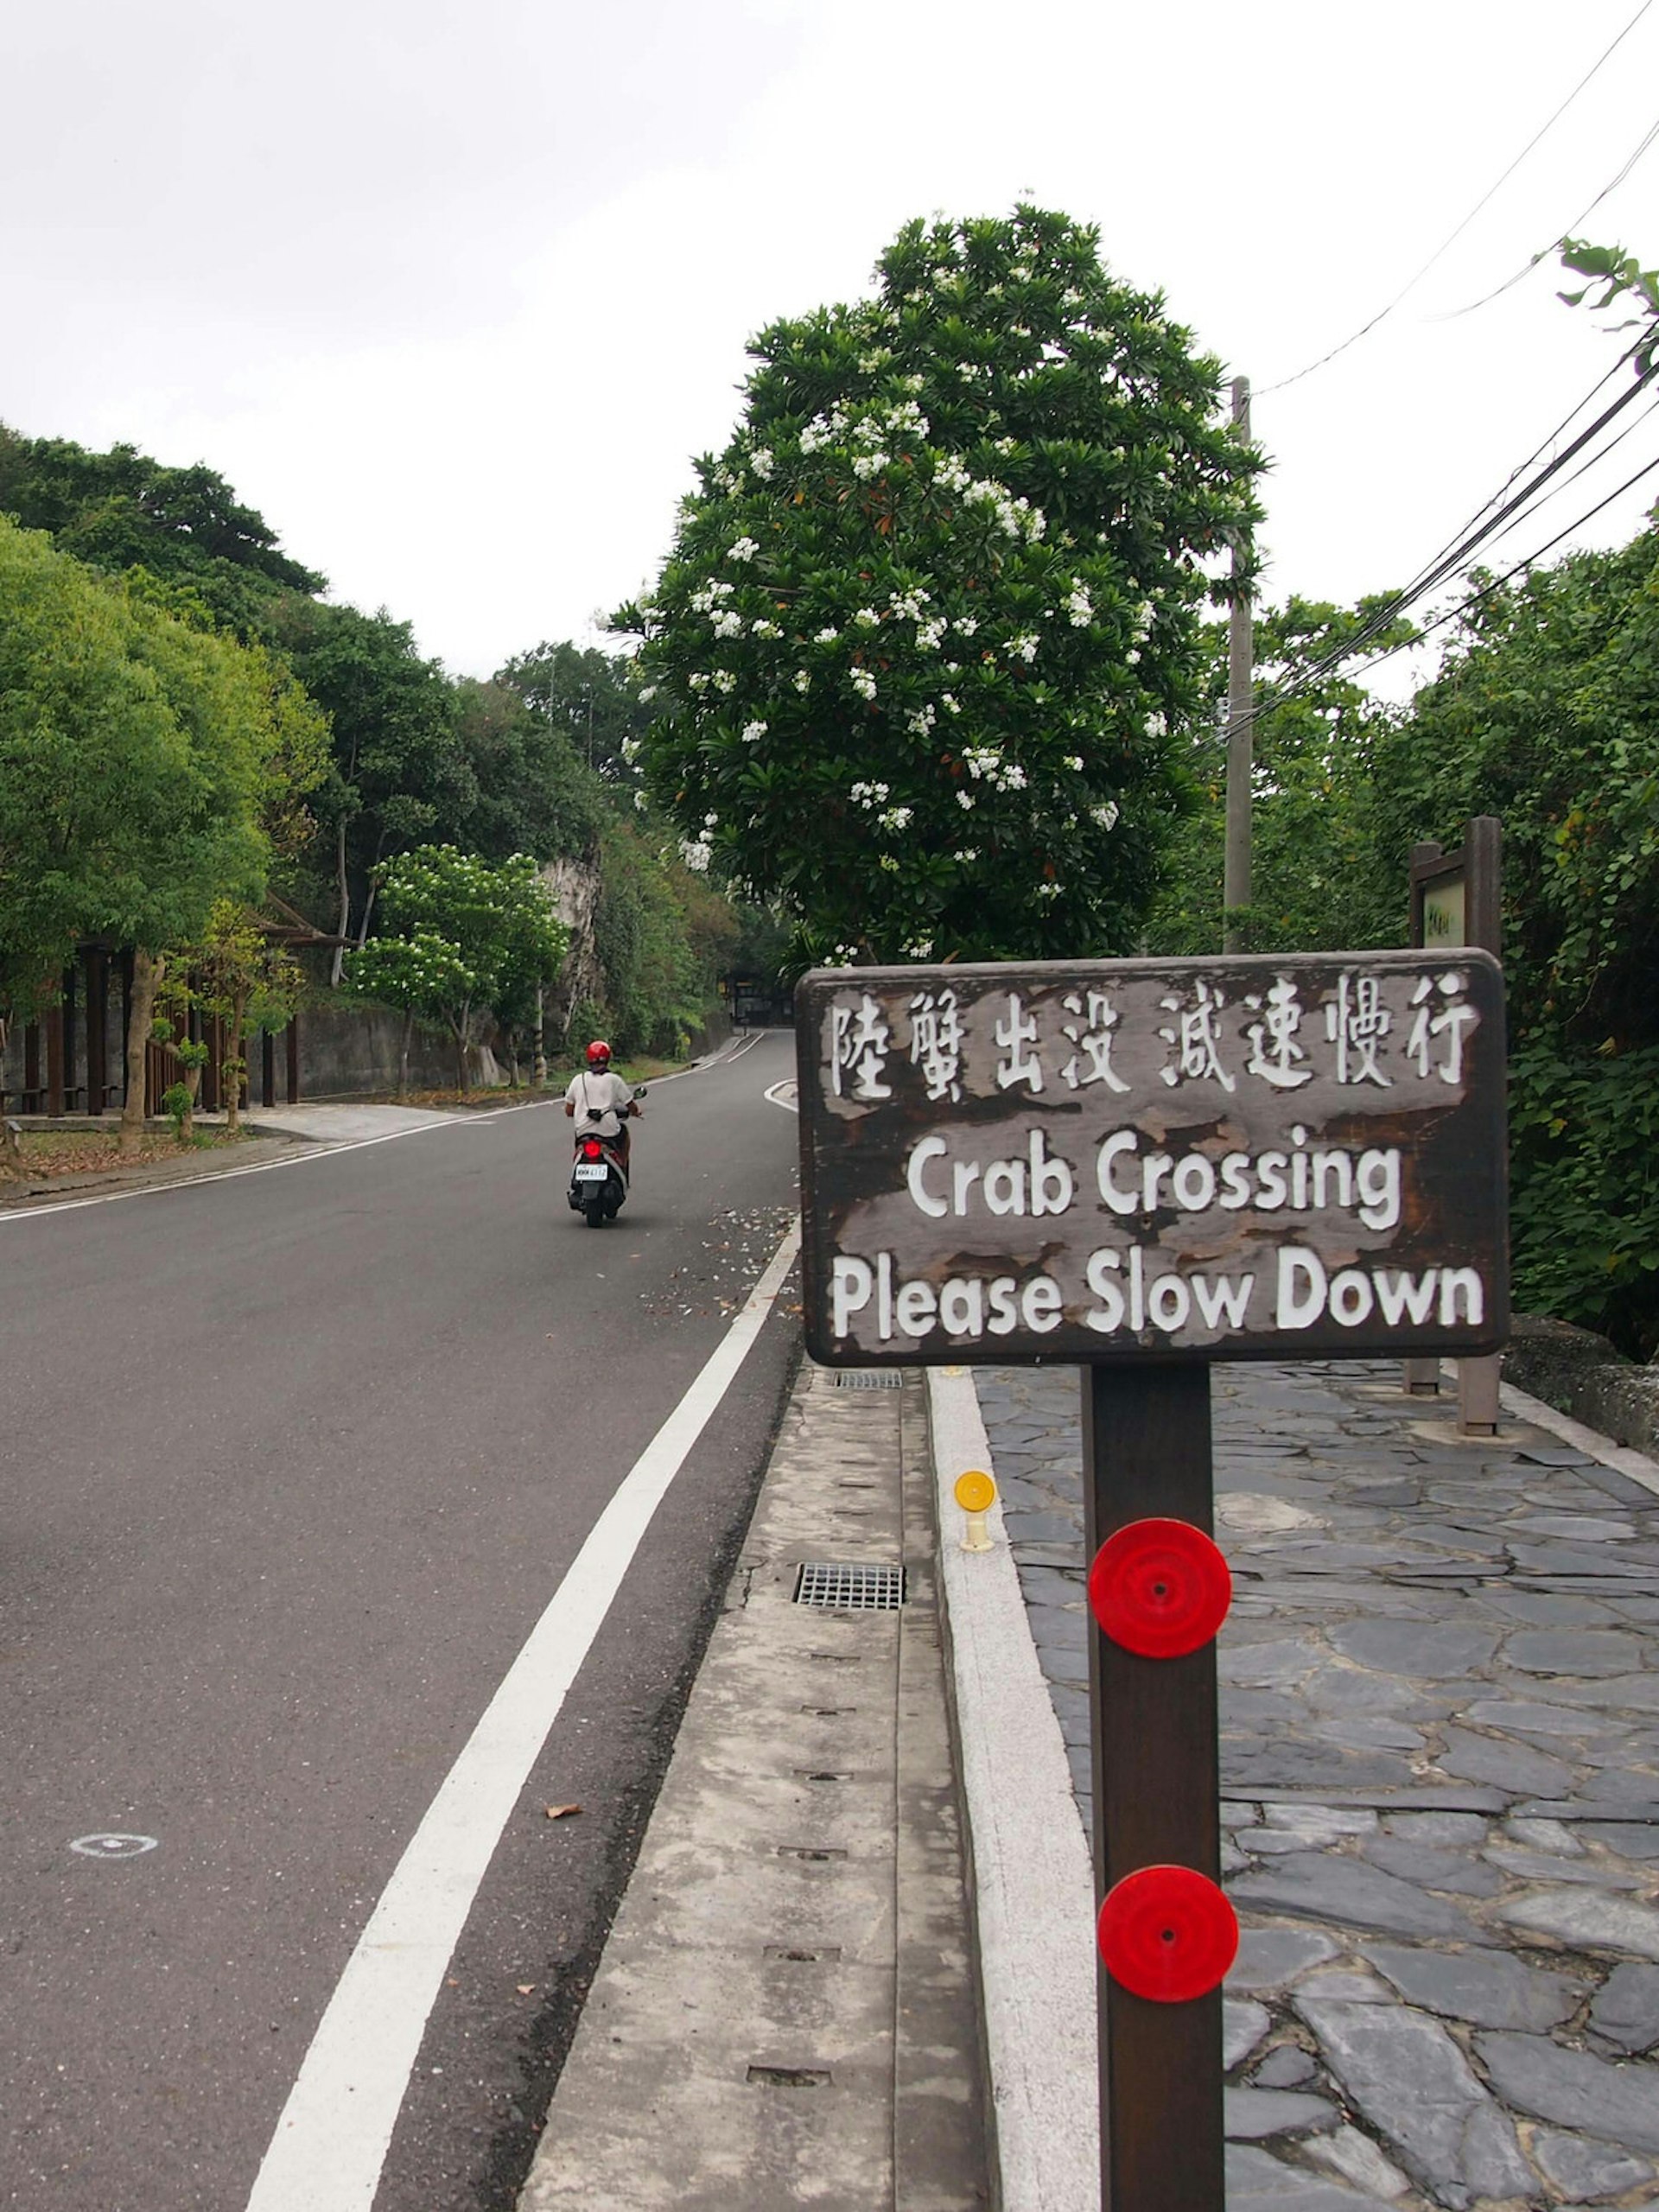 A scooter drives past a wooden sign that reads 'Crab Crossing Please Slow Down'. Drivers should take care not to disturb crabs crossing the road © Tess Humphrys / Lonely Planet